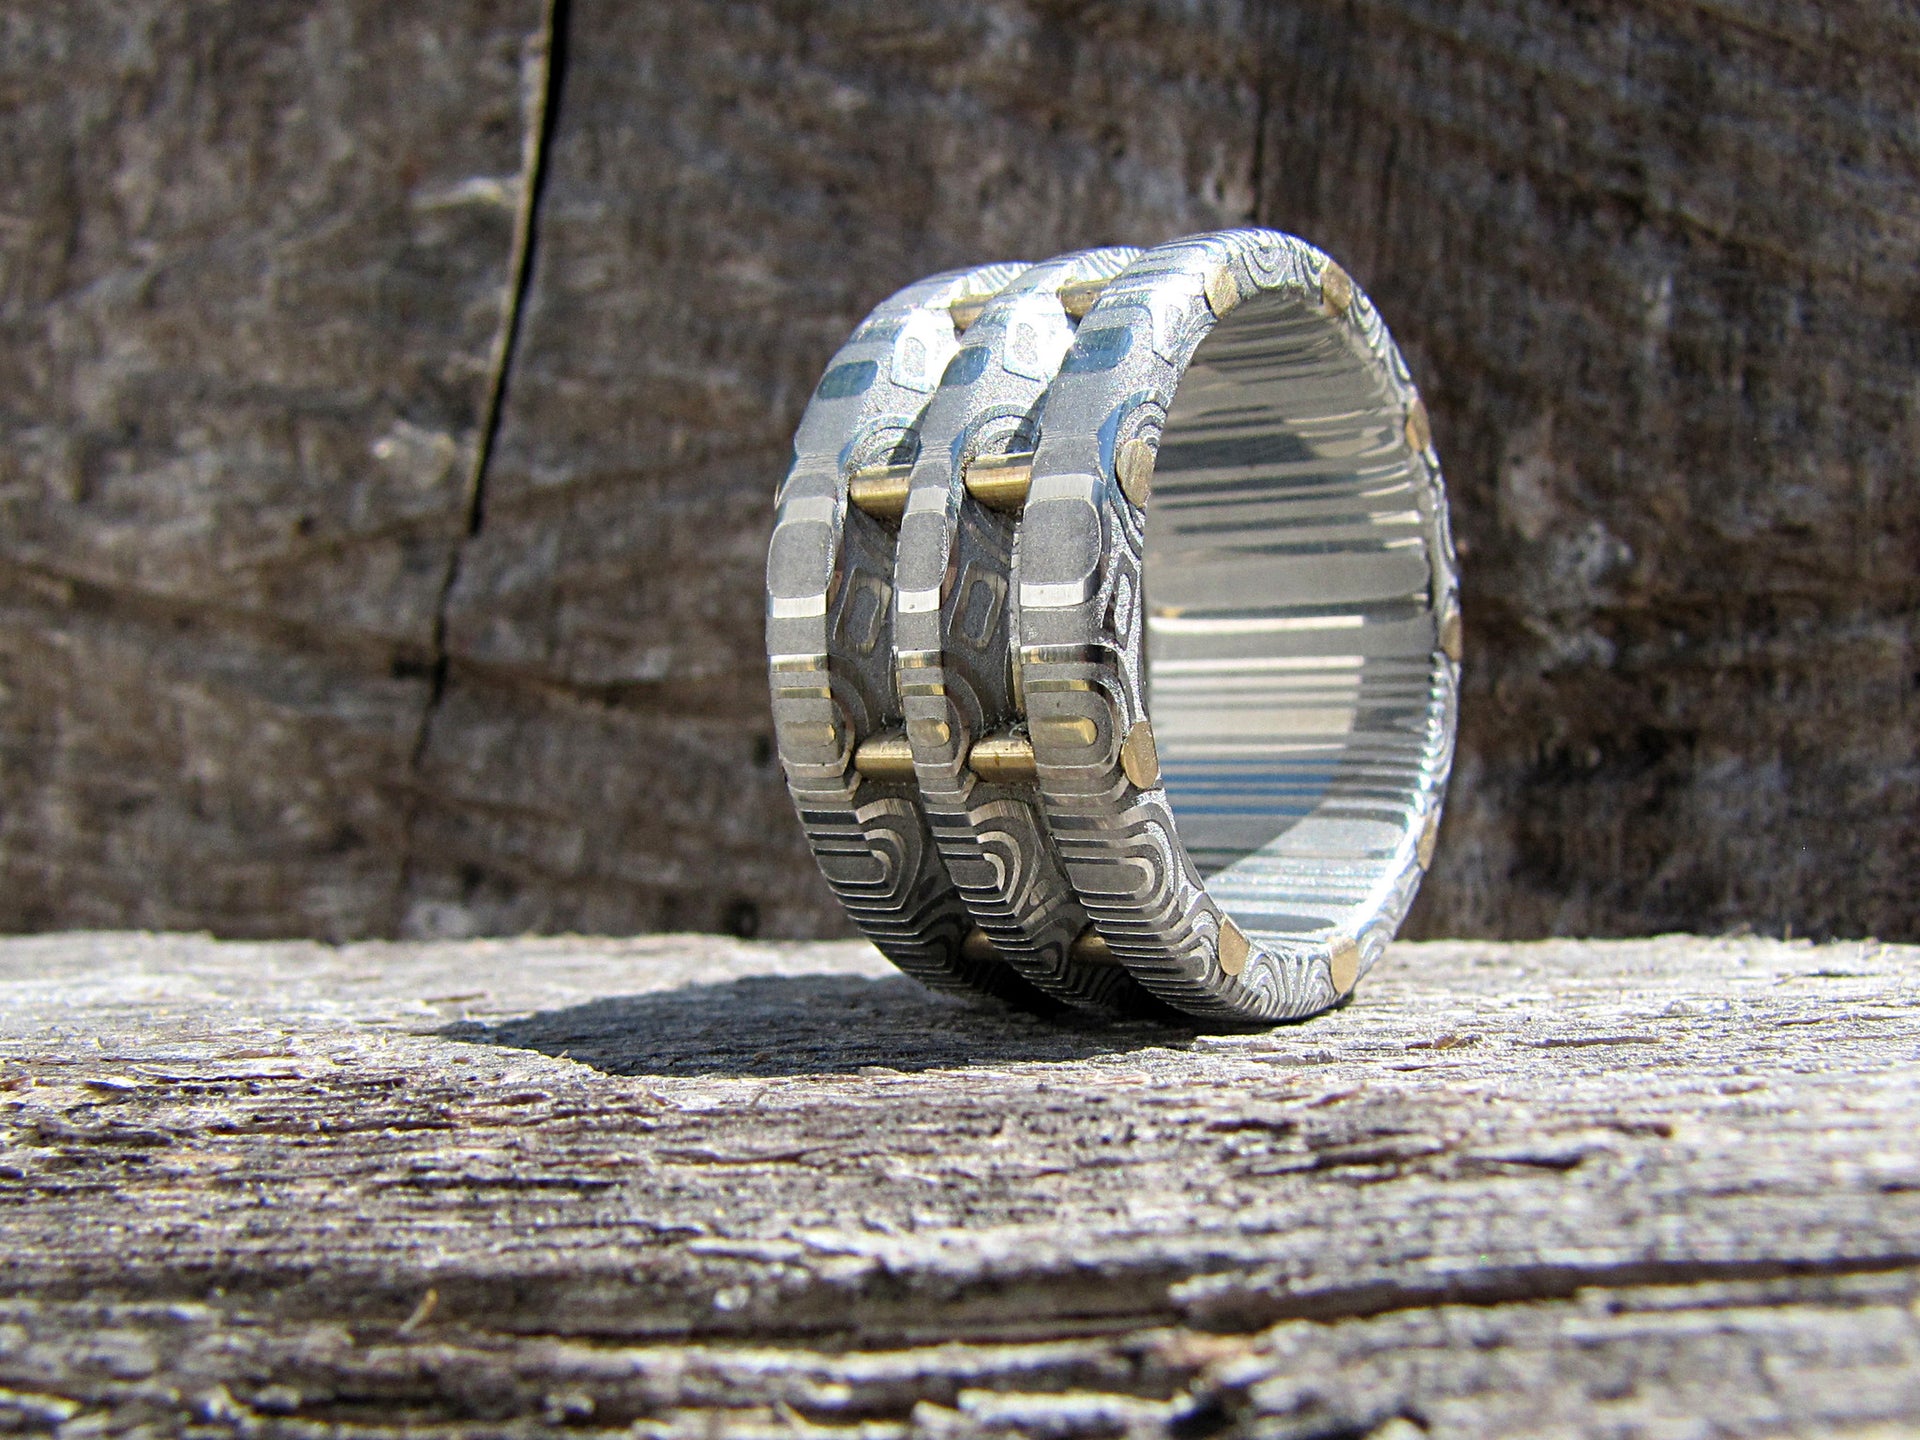 Steampunk Men's Wedding Band Made of Solid Titanium and Brass Rivets –  Richter Scale Rings